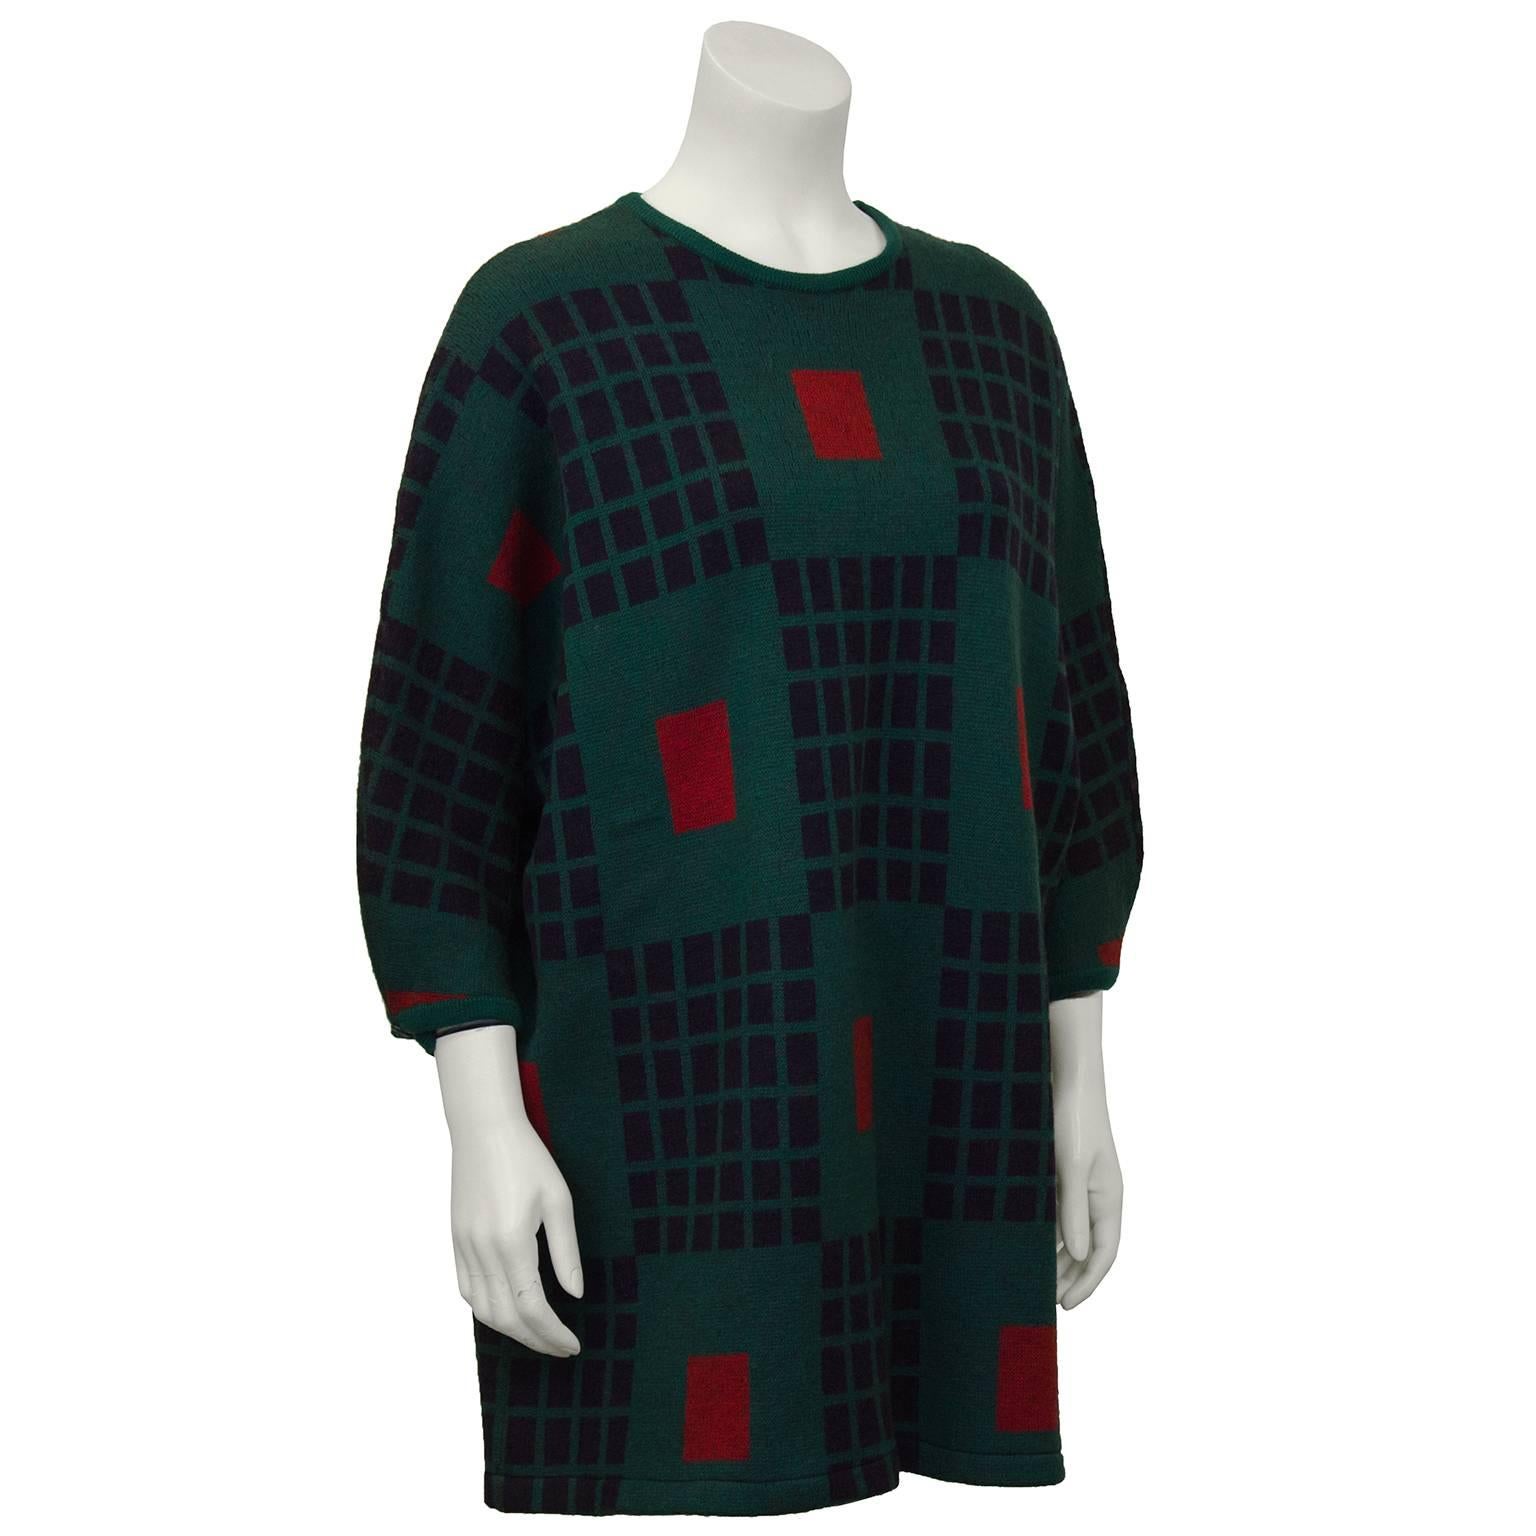 Hunter green with red and black geometric pattern. Dolman sleeves, works great over pants or as mini dress with tights. In excellent vintage condition. US size 6.

Sleeve: 8